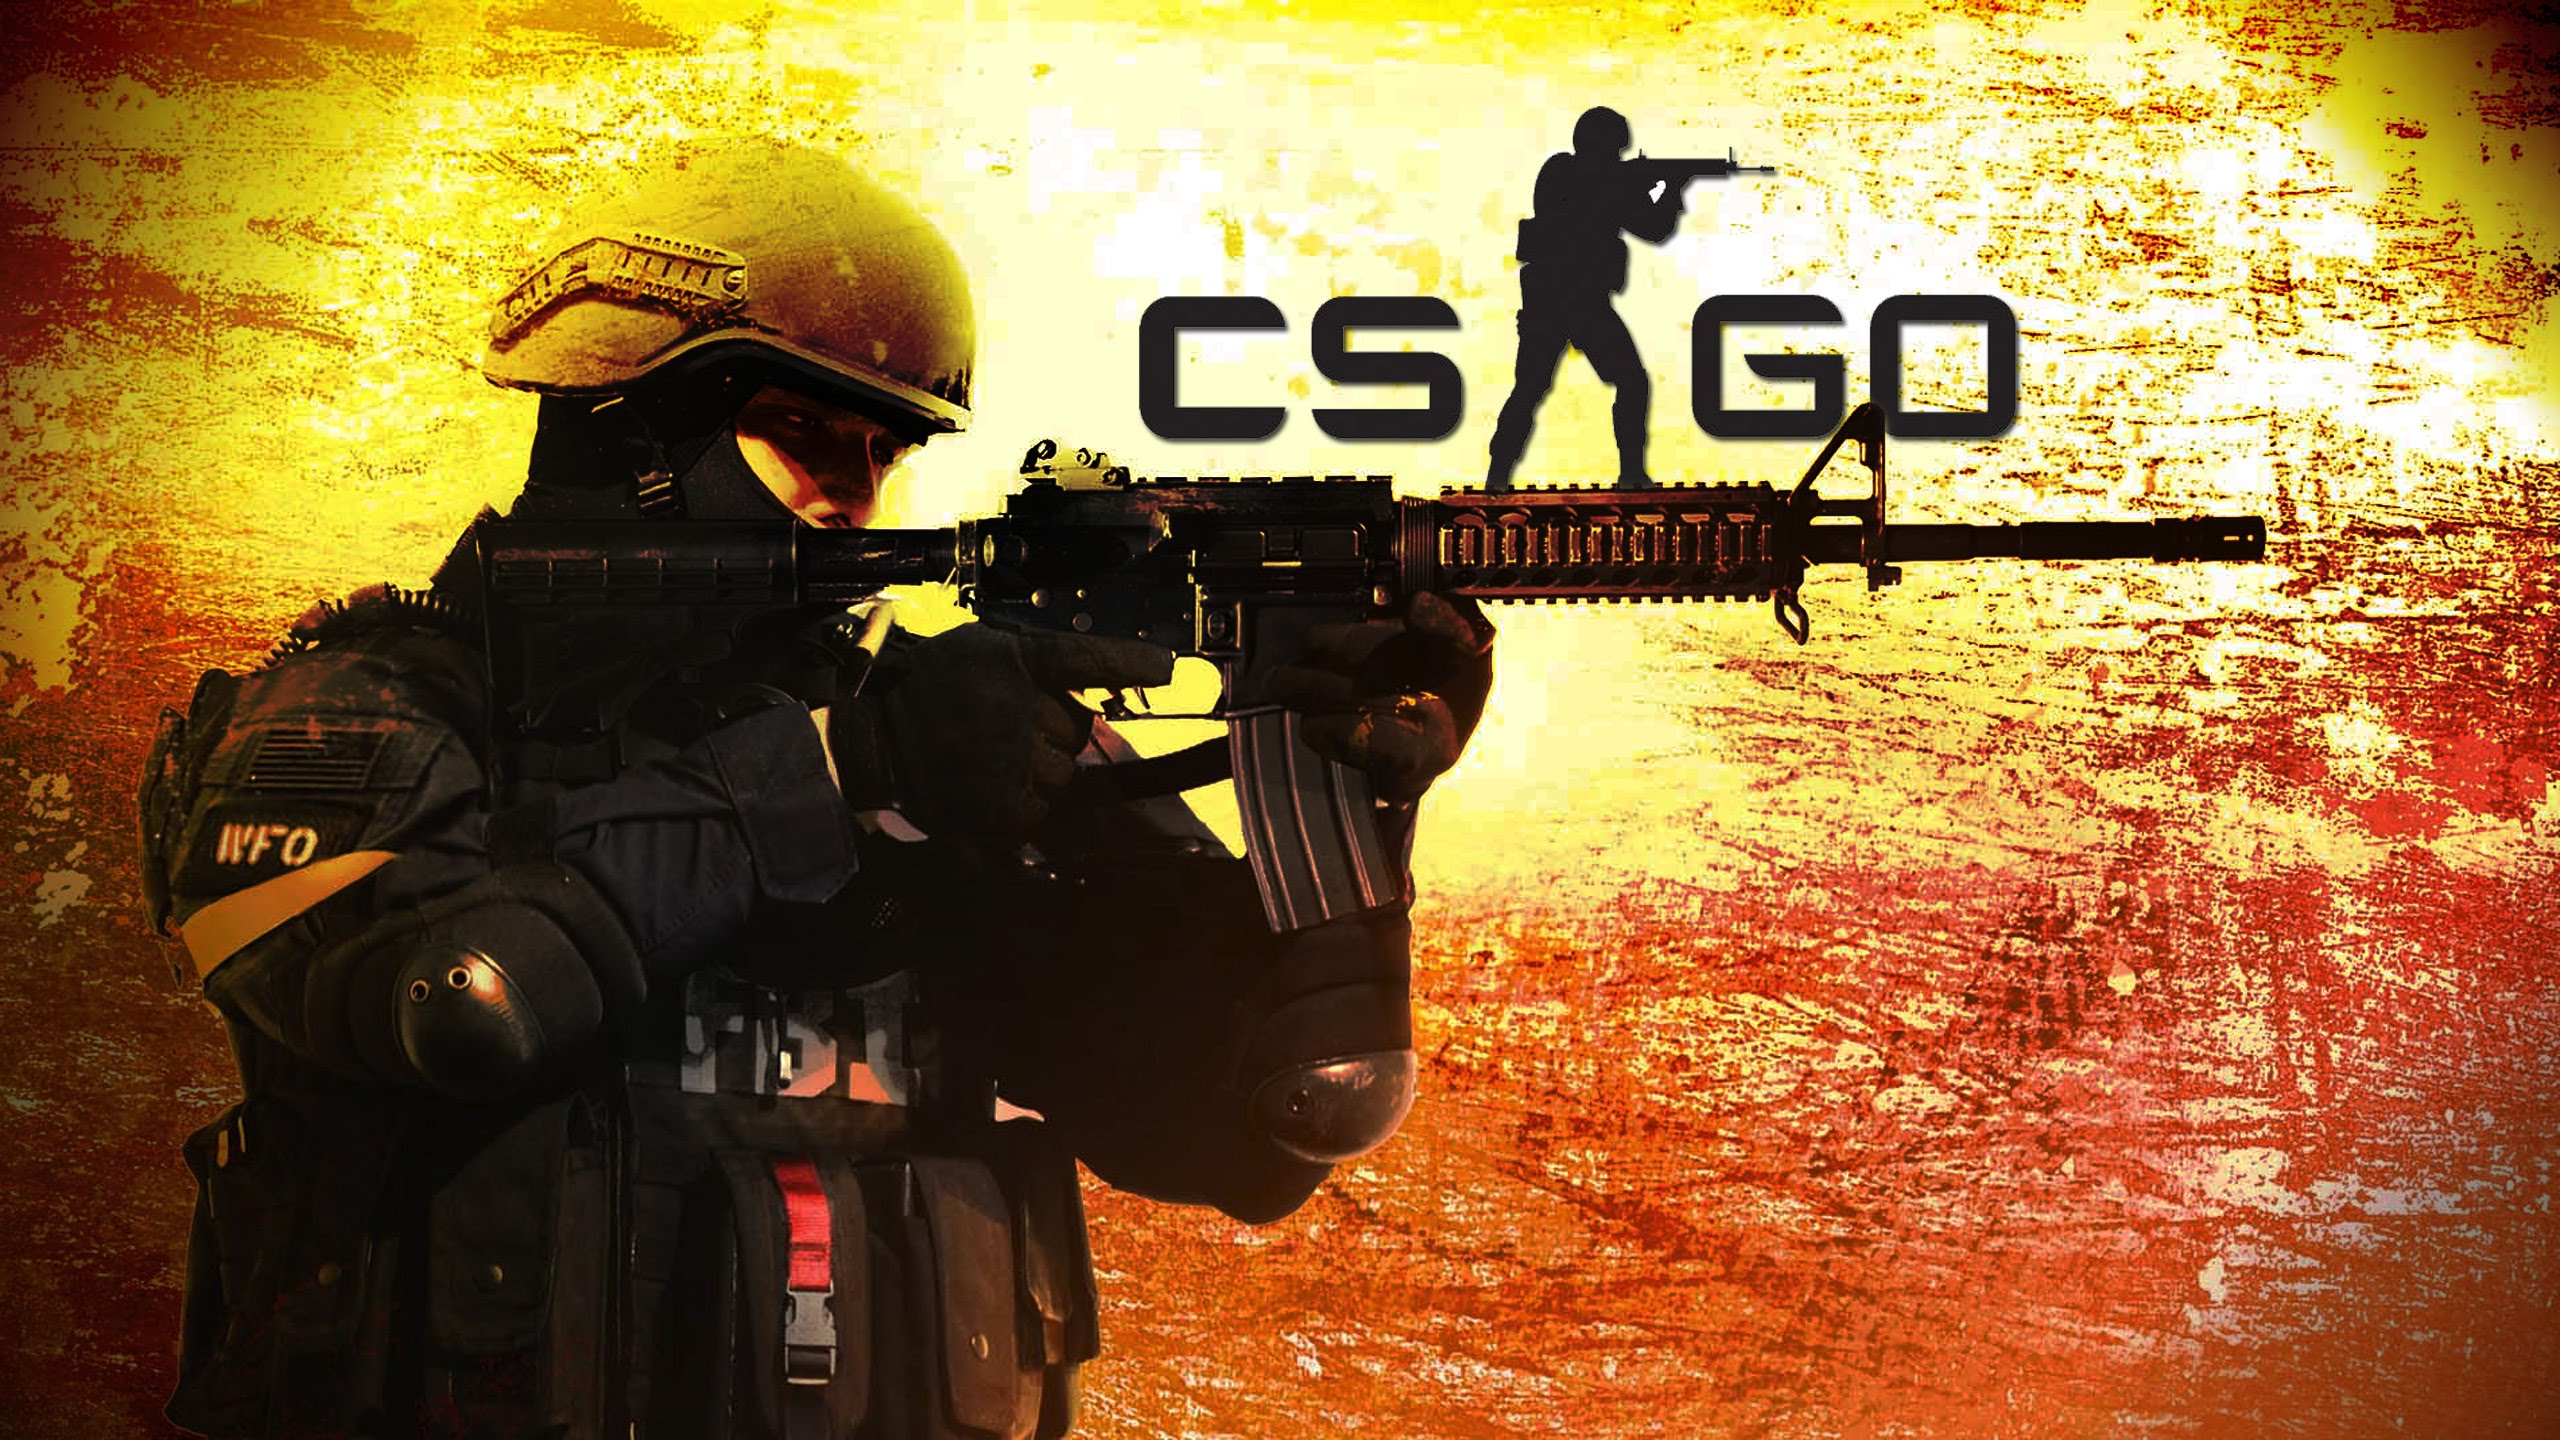 counter strike global offensive wallpaper,action adventure game,shooter game,soldier,games,movie